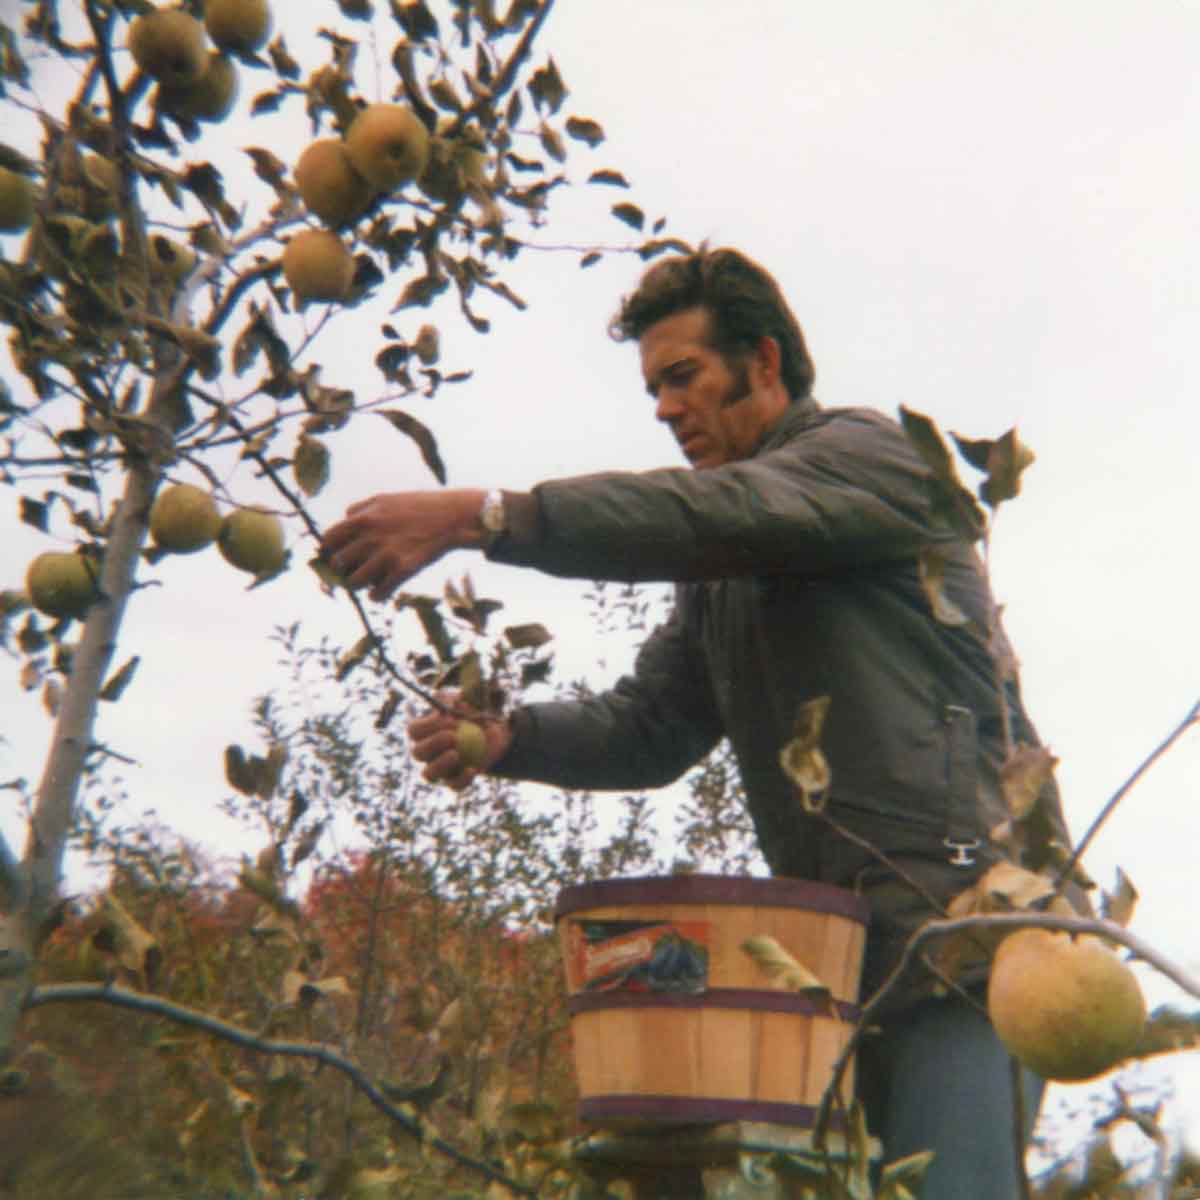 A man on a ladder picking apples.